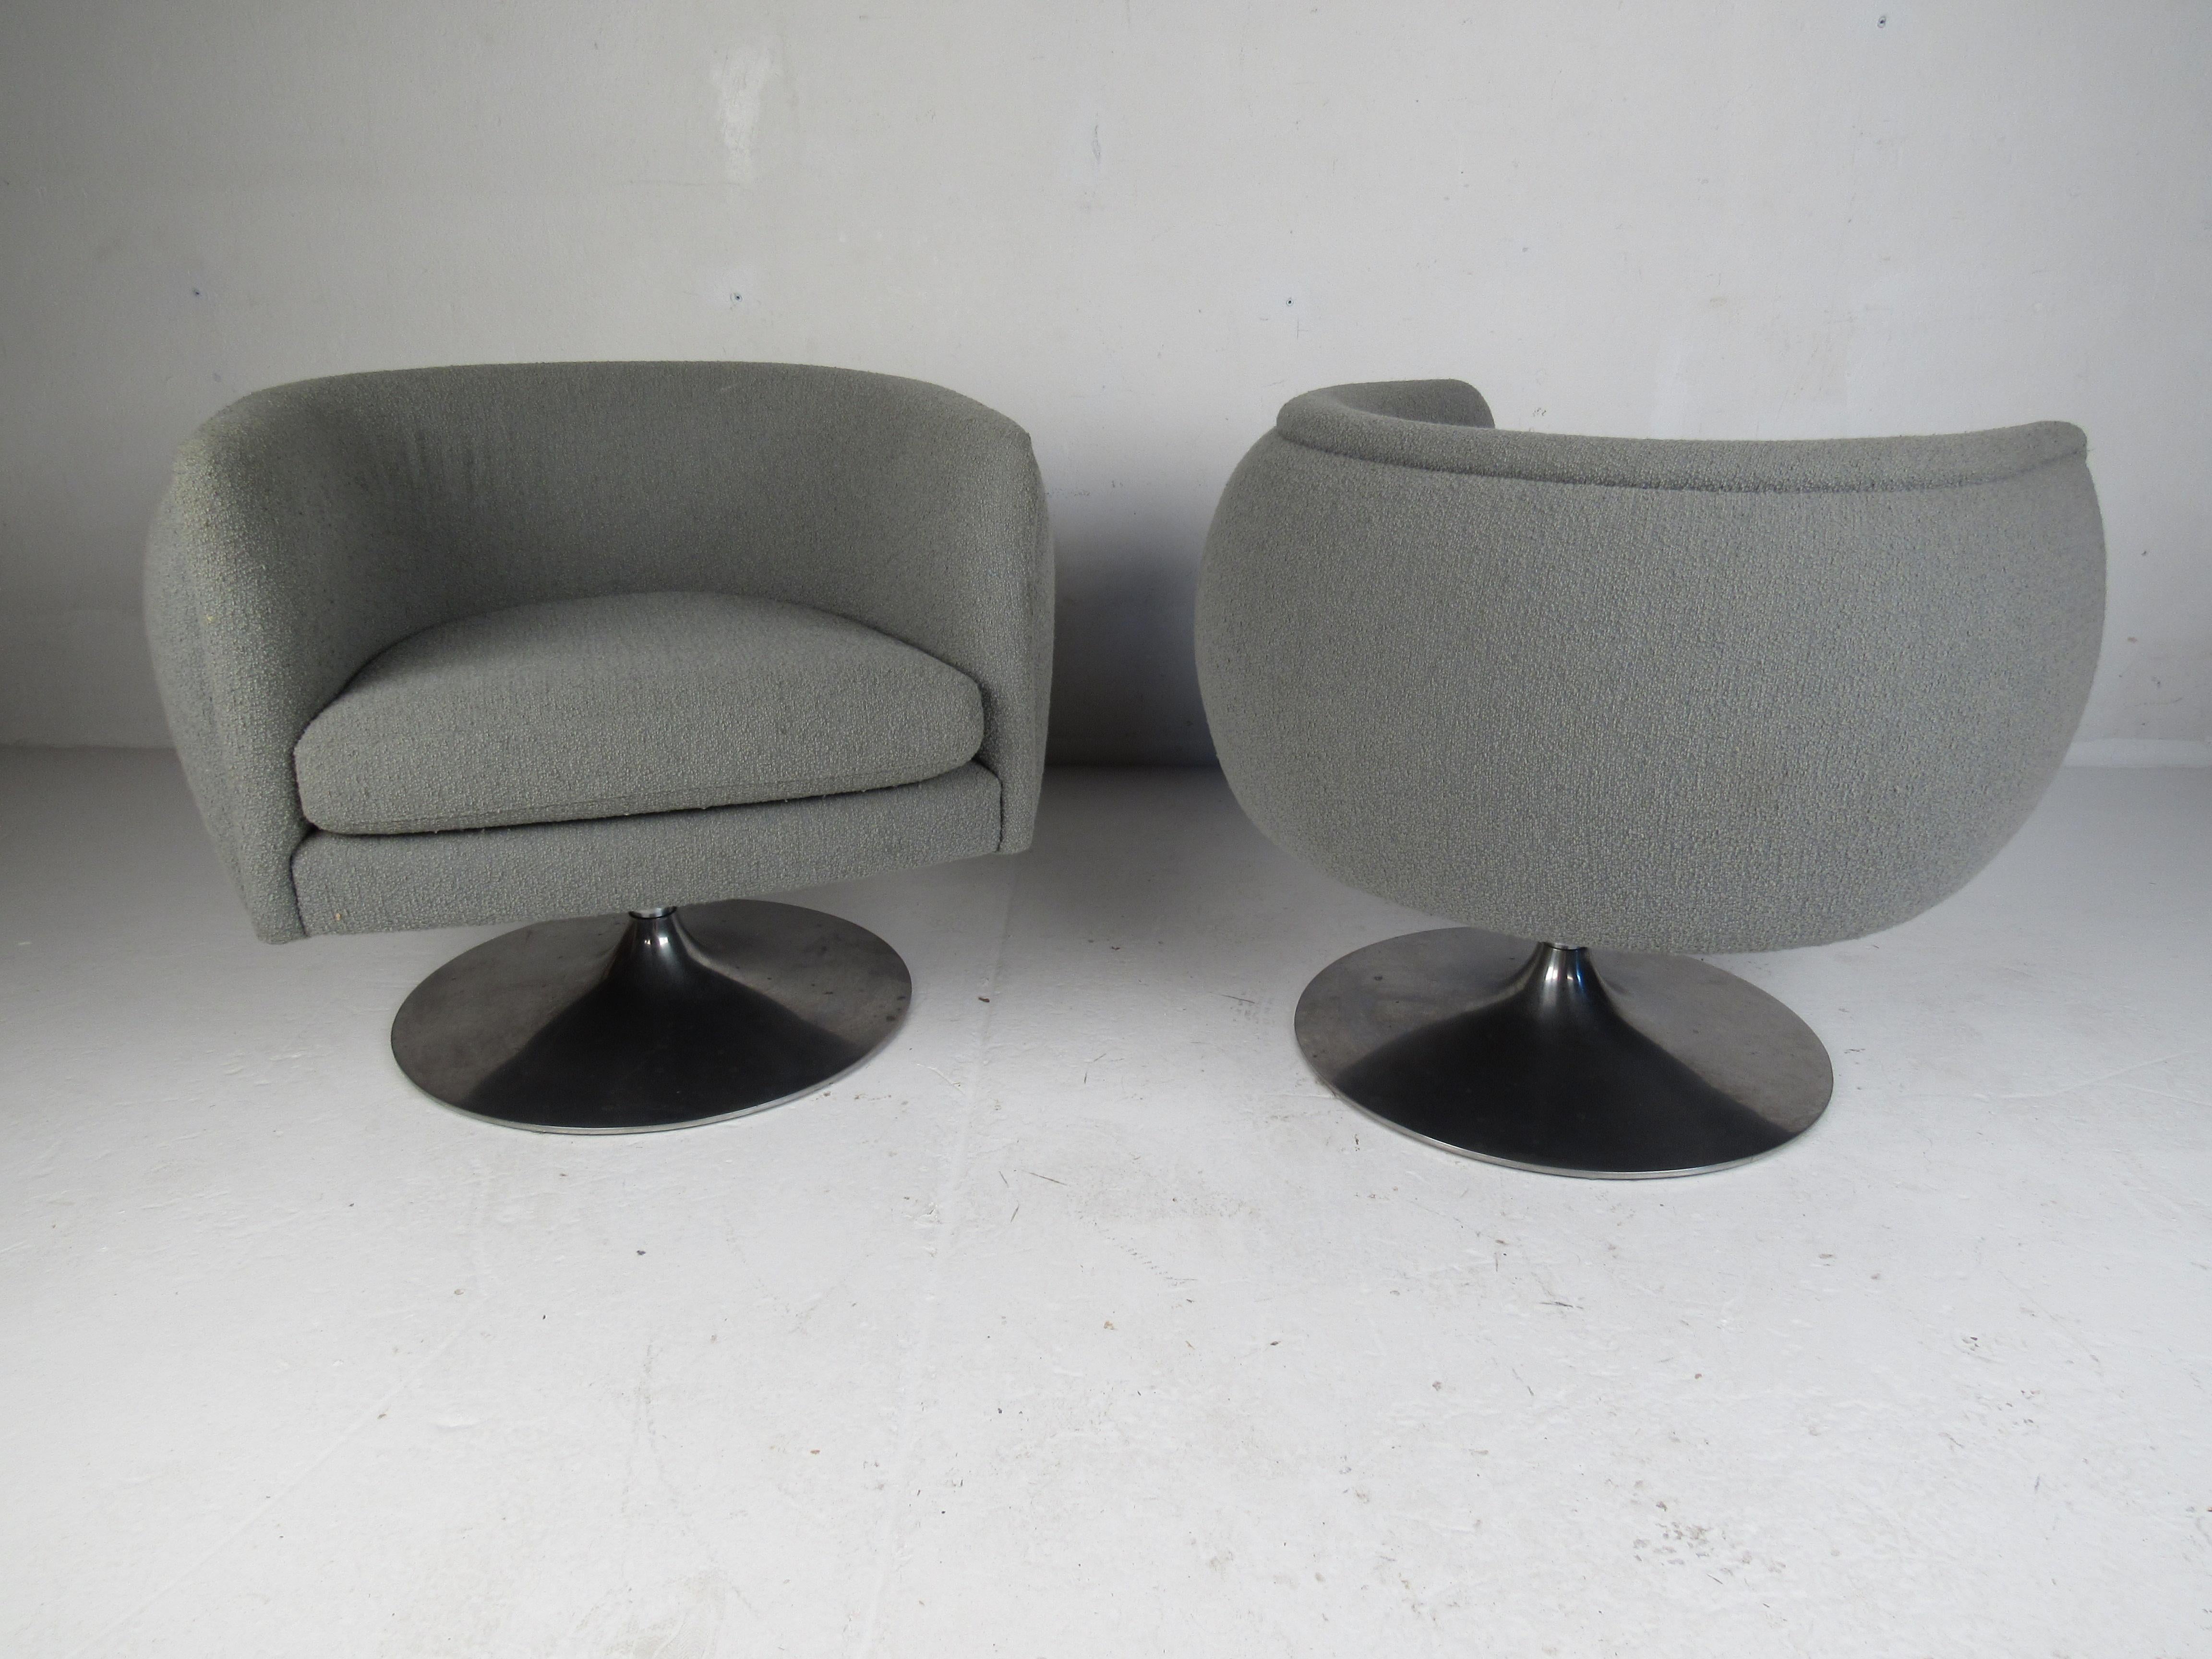 This impressive pair of swivel lounge chairs feature a tulip shape with an aluminum pedestal base and overstuffed seating. The thick removable cushions and 360 degree swivel add convenience without sacrificing style. A sleek and comfortable pair of